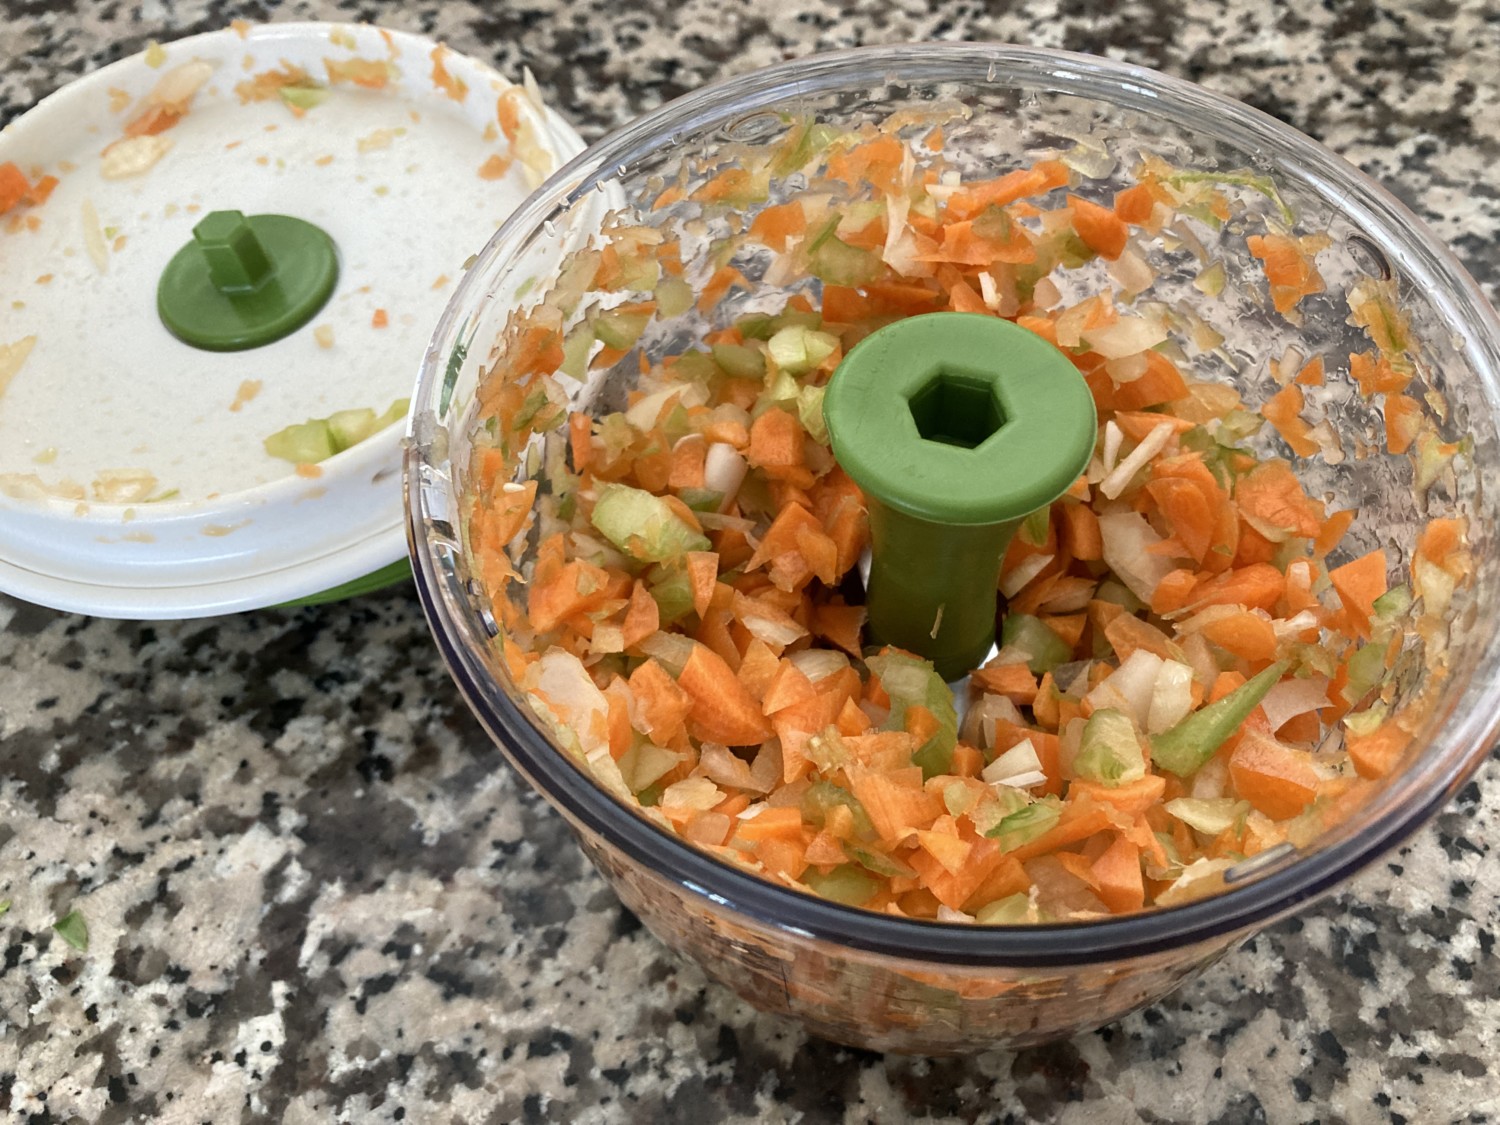 Bought the viral veggie chopper and I LOVE IT!! Linked in my